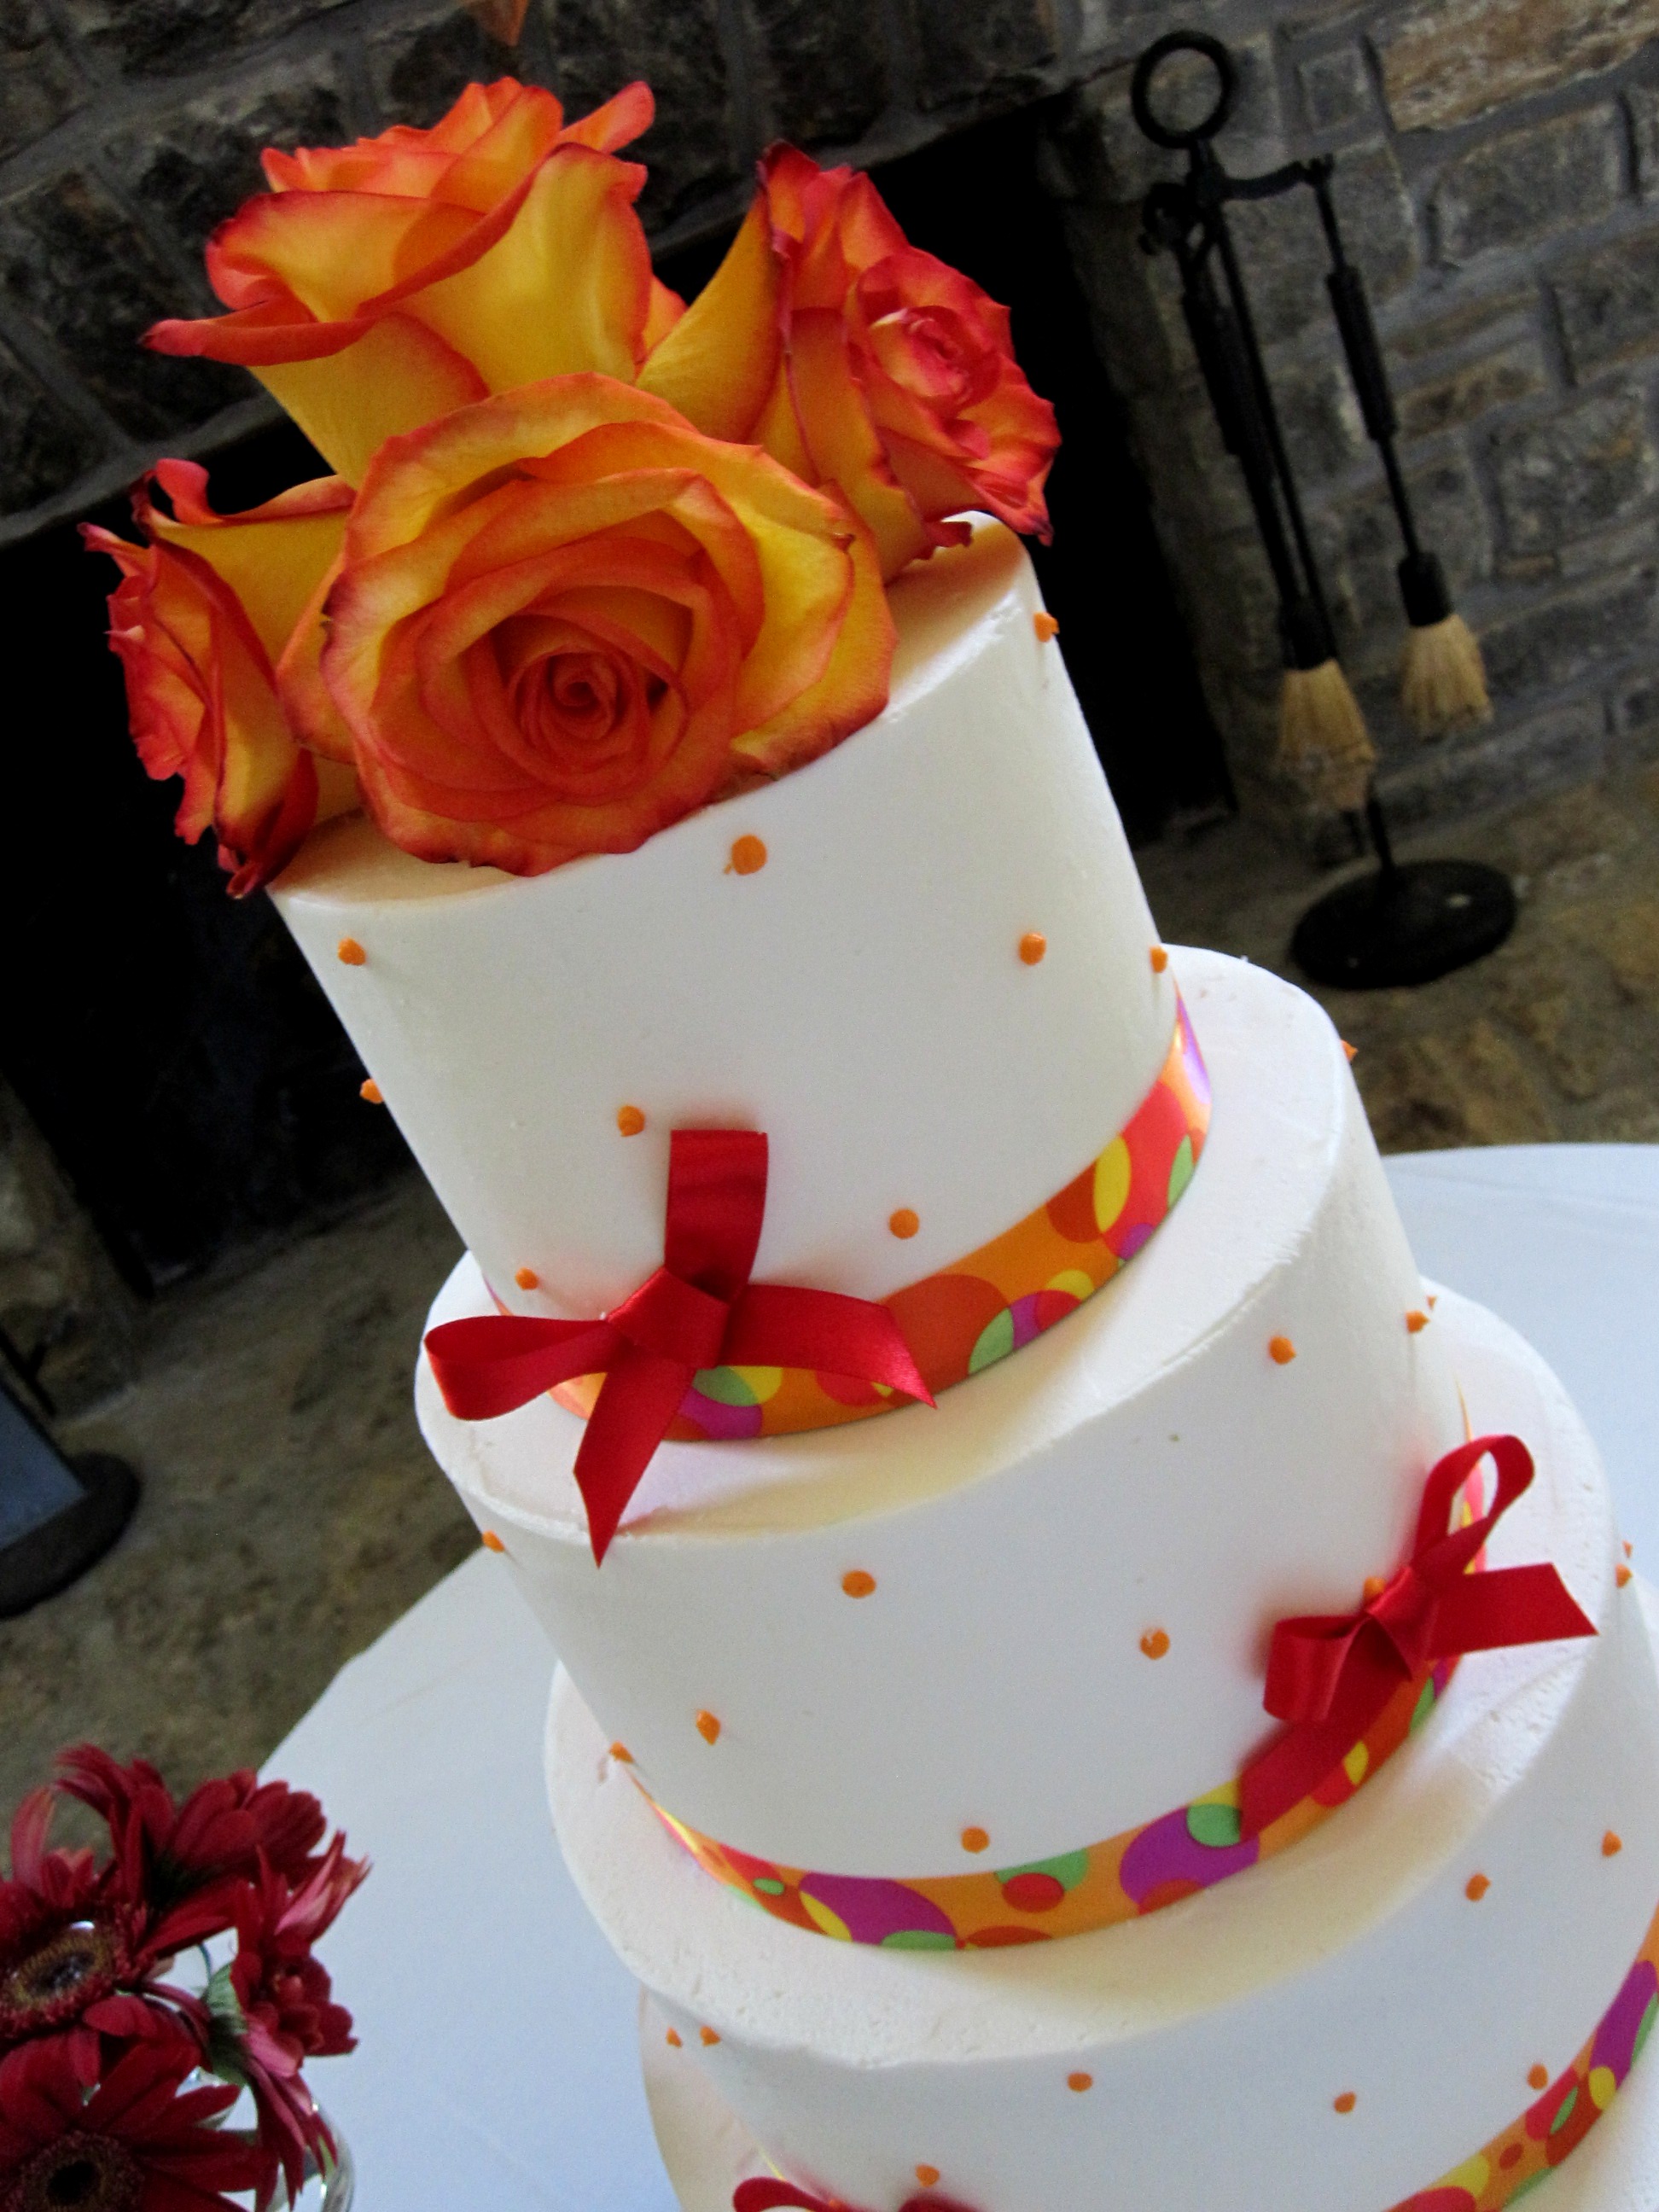 Red and Yellow Wedding Cake